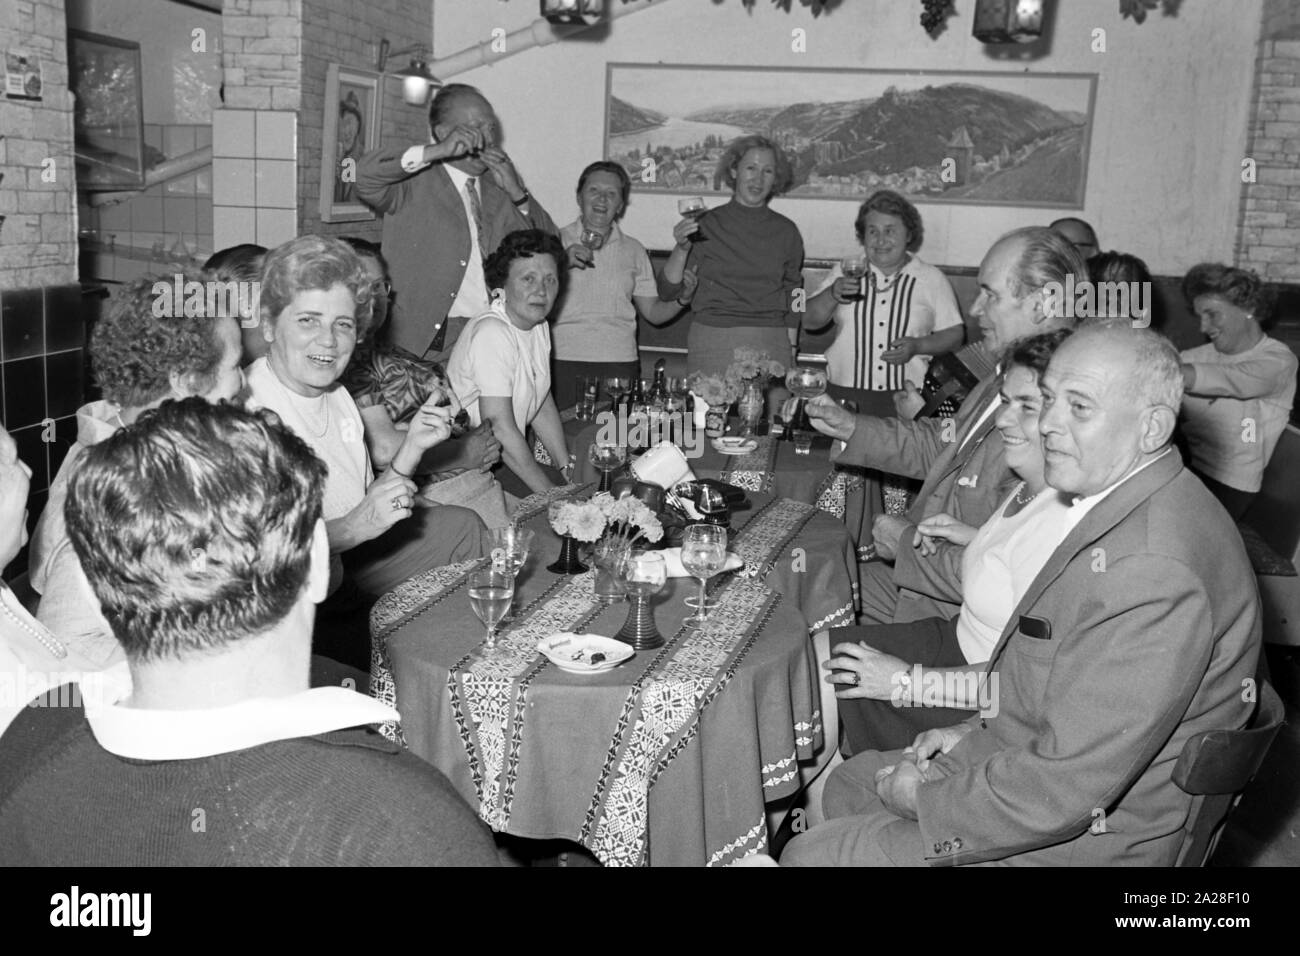 Menschen feiern in geselliger Runde in Bacharach, Deutschland 1968. People having a feast at Bacharach, Germany 1968. Stock Photo